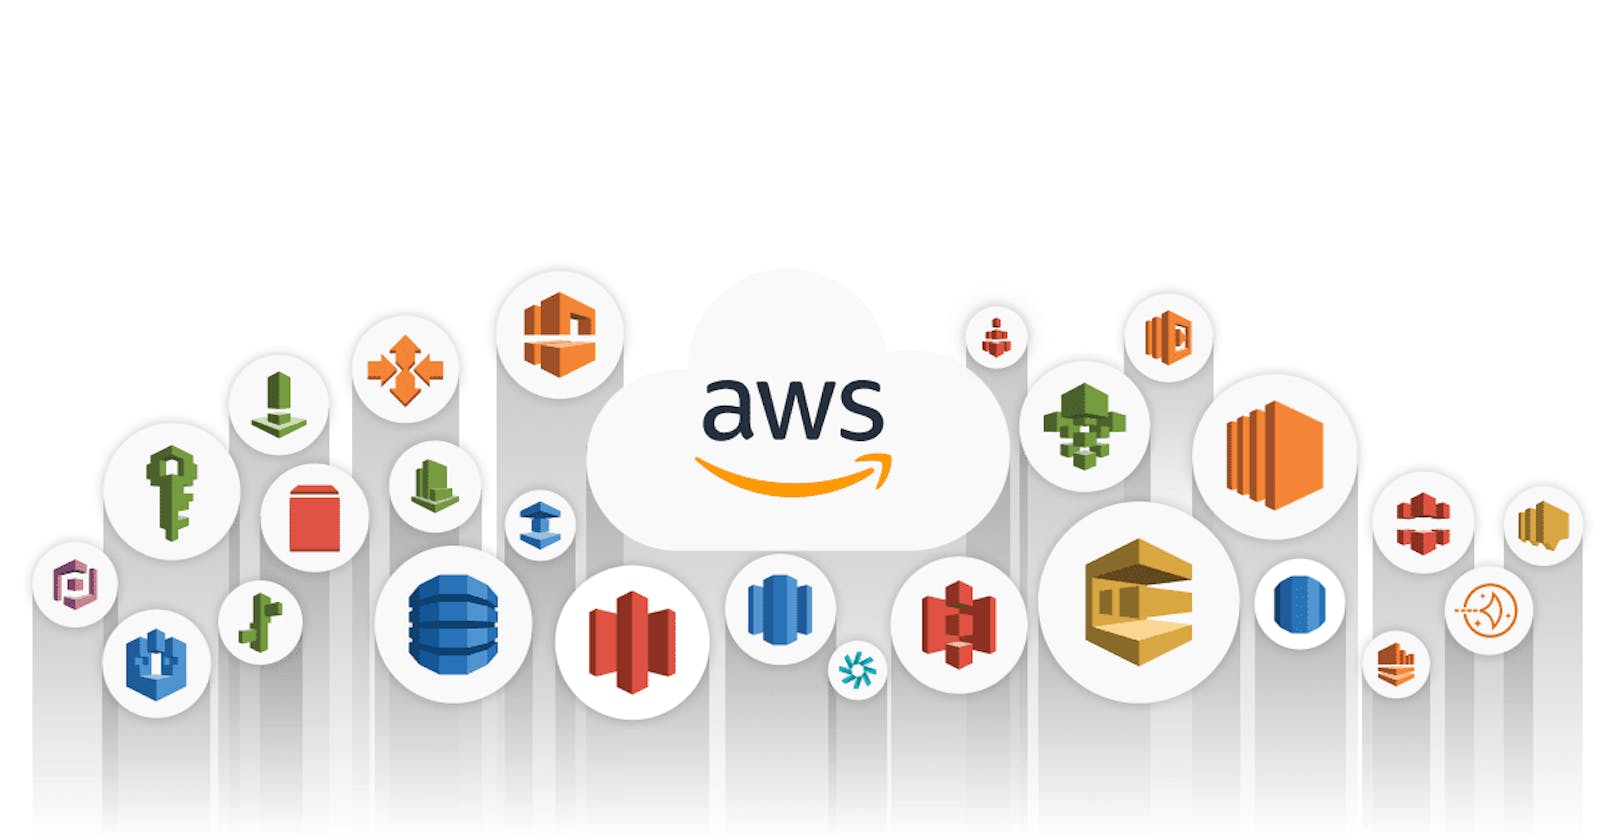 Day 6: AWS
Scaling to Success